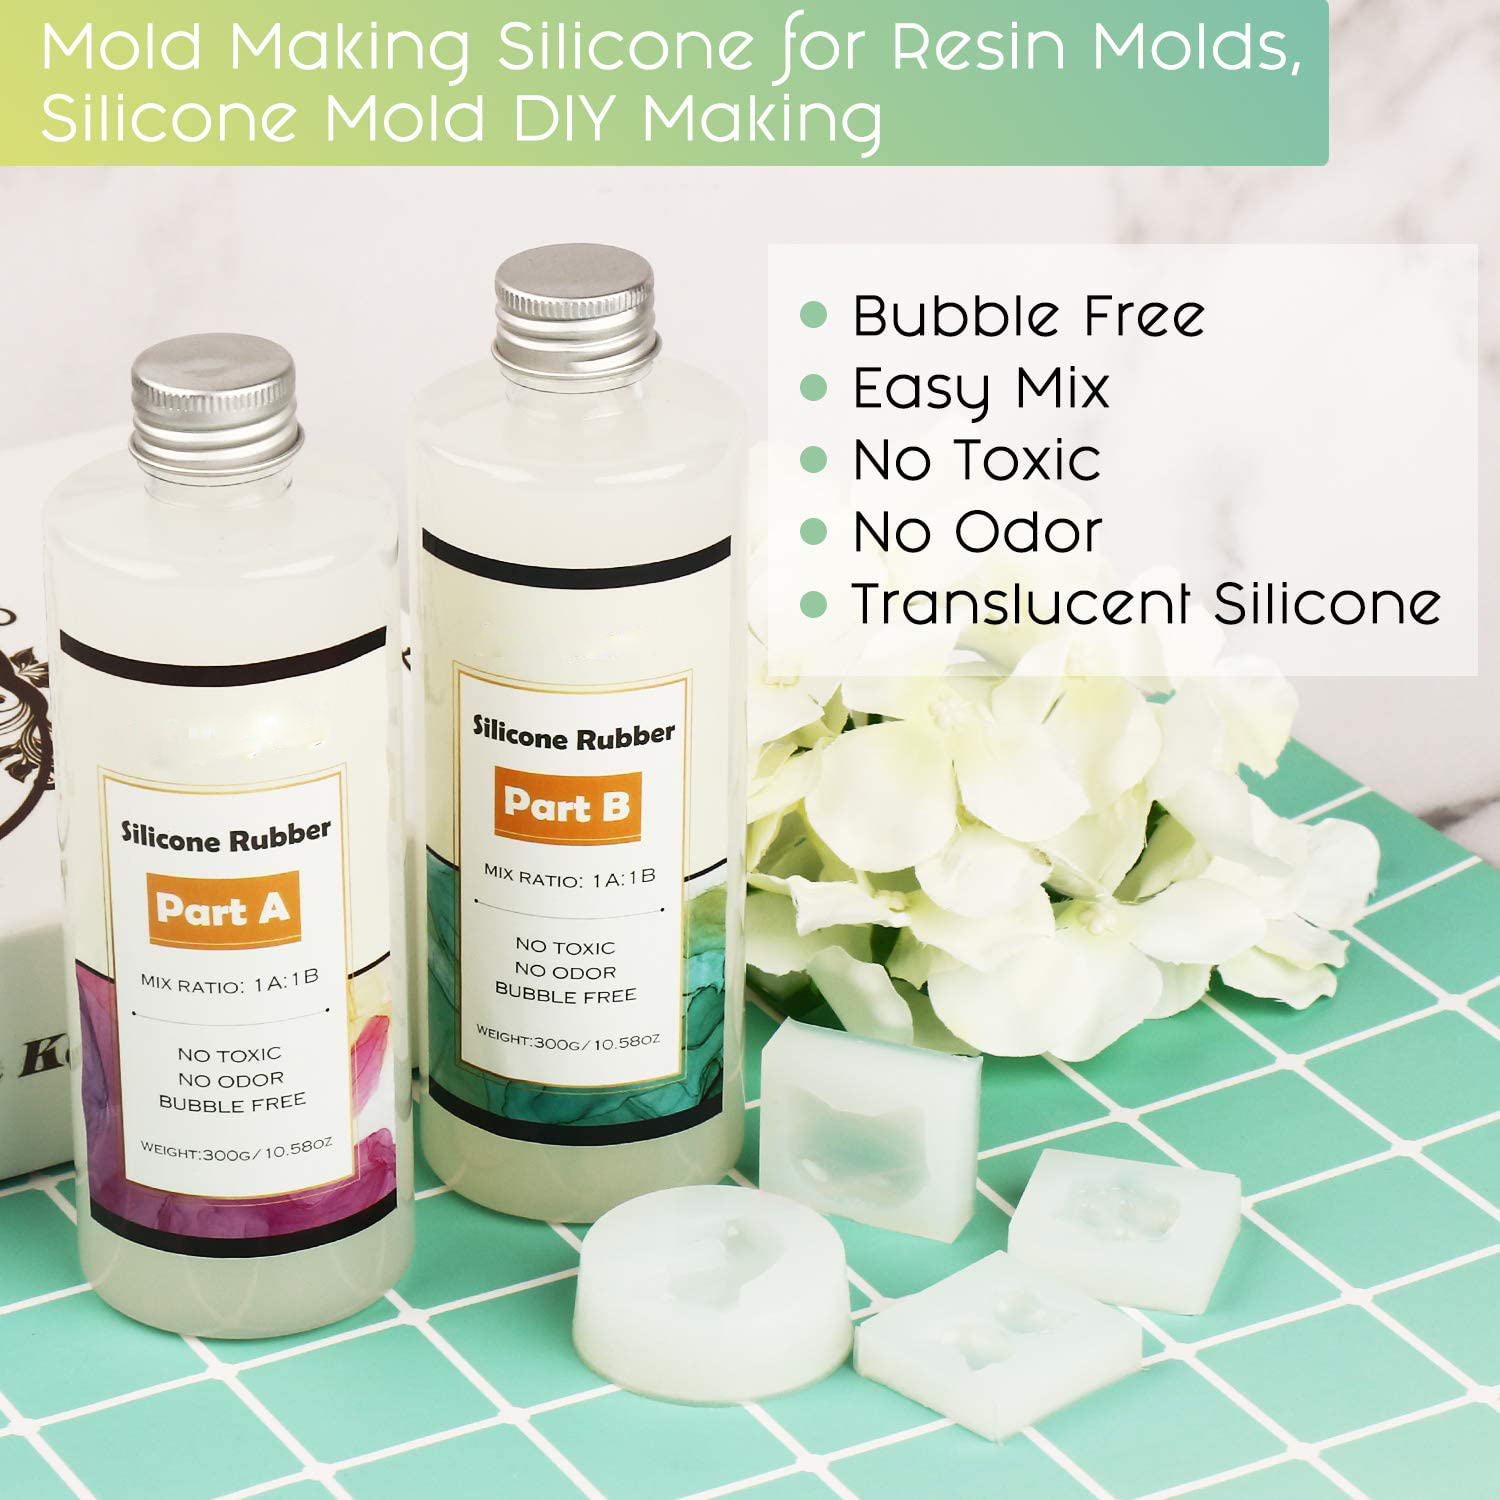 Silicone Molds Making Kit Translucent Silicone Rubber Non-Toxic Liquid Molds Making Silicone - Mixing Ratio 1:1 - Ideal for Resin Molds, Silicone Molds DIY Manual Making